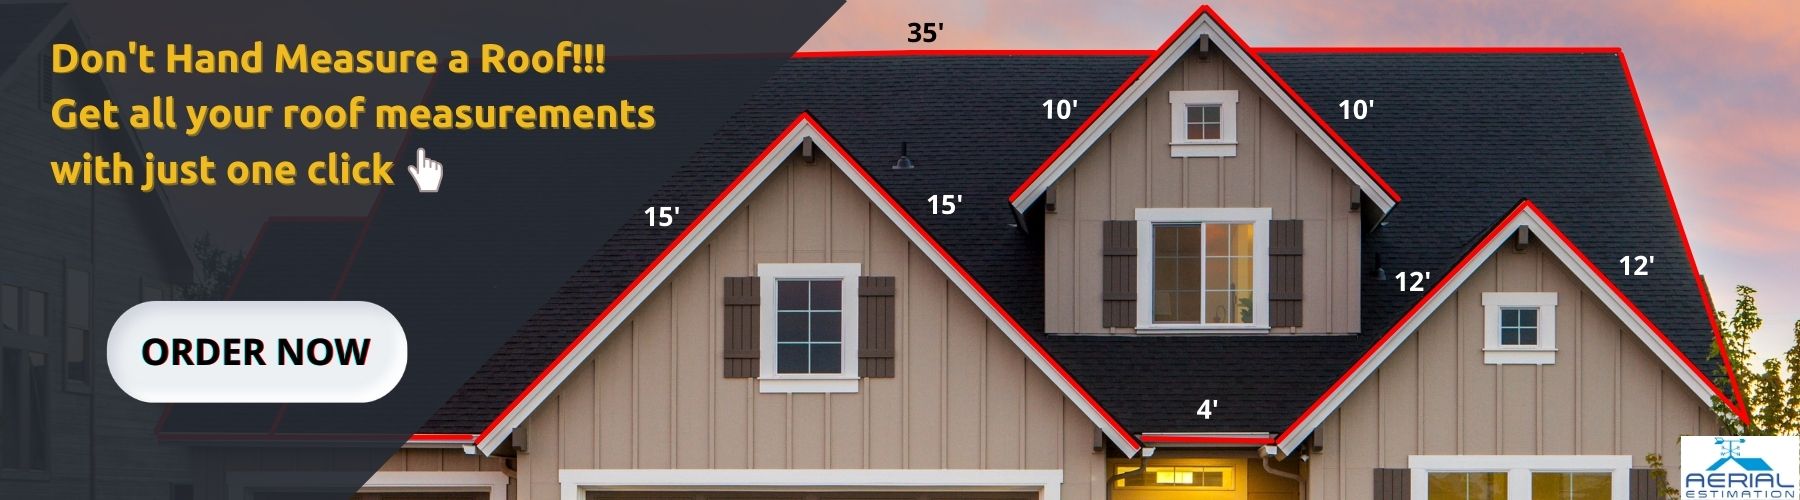 dont-hand-measure-roof